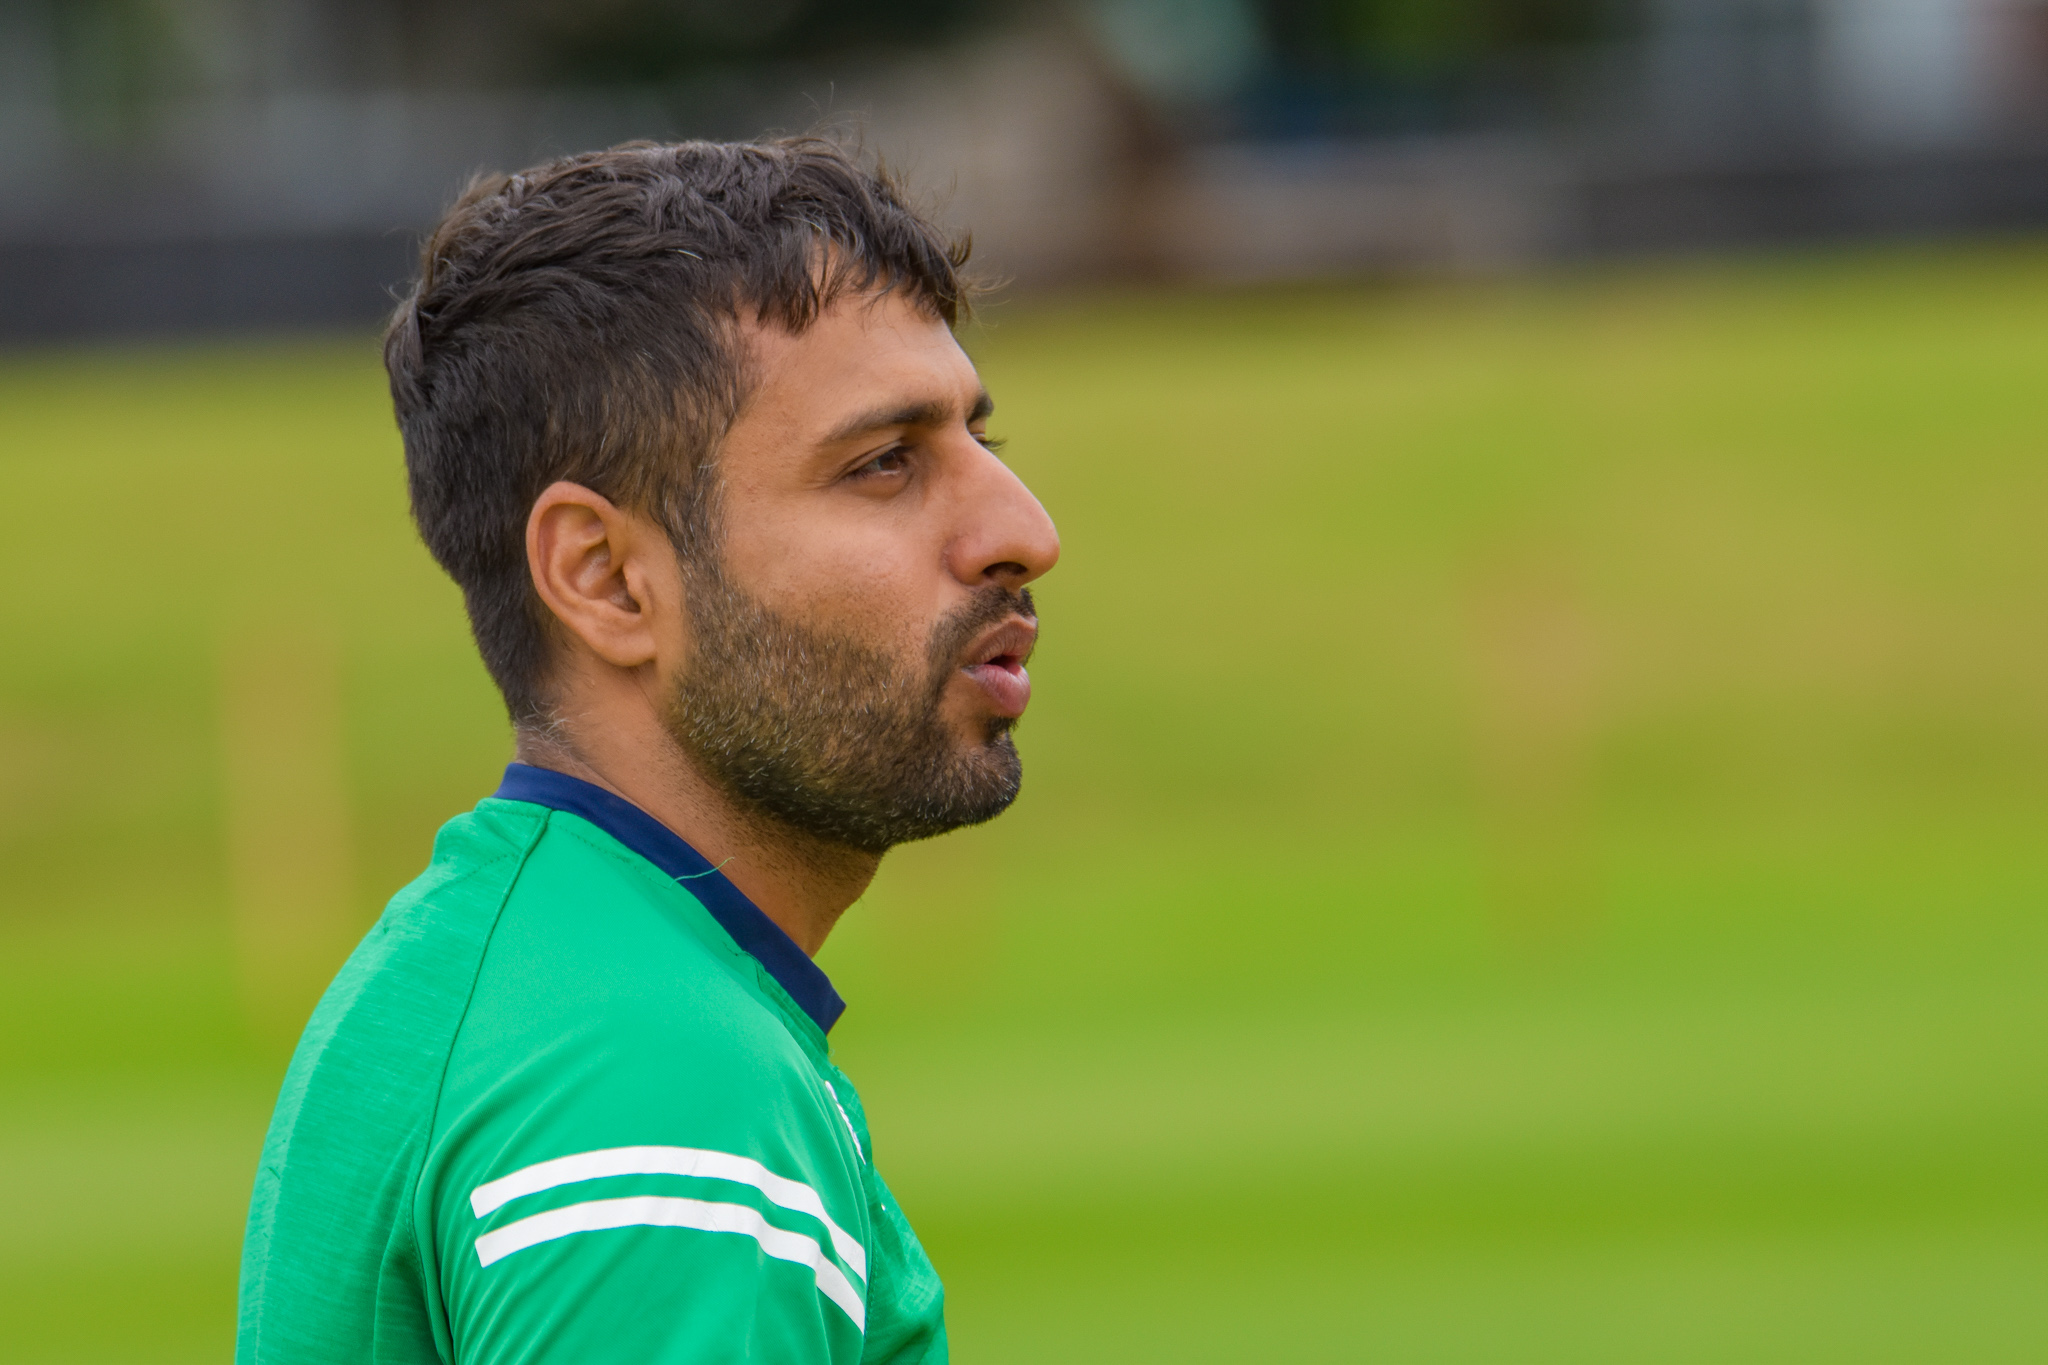 Cricket Ireland: Simi Singh - “Ranking is just a number - we’re looking forward to the series”